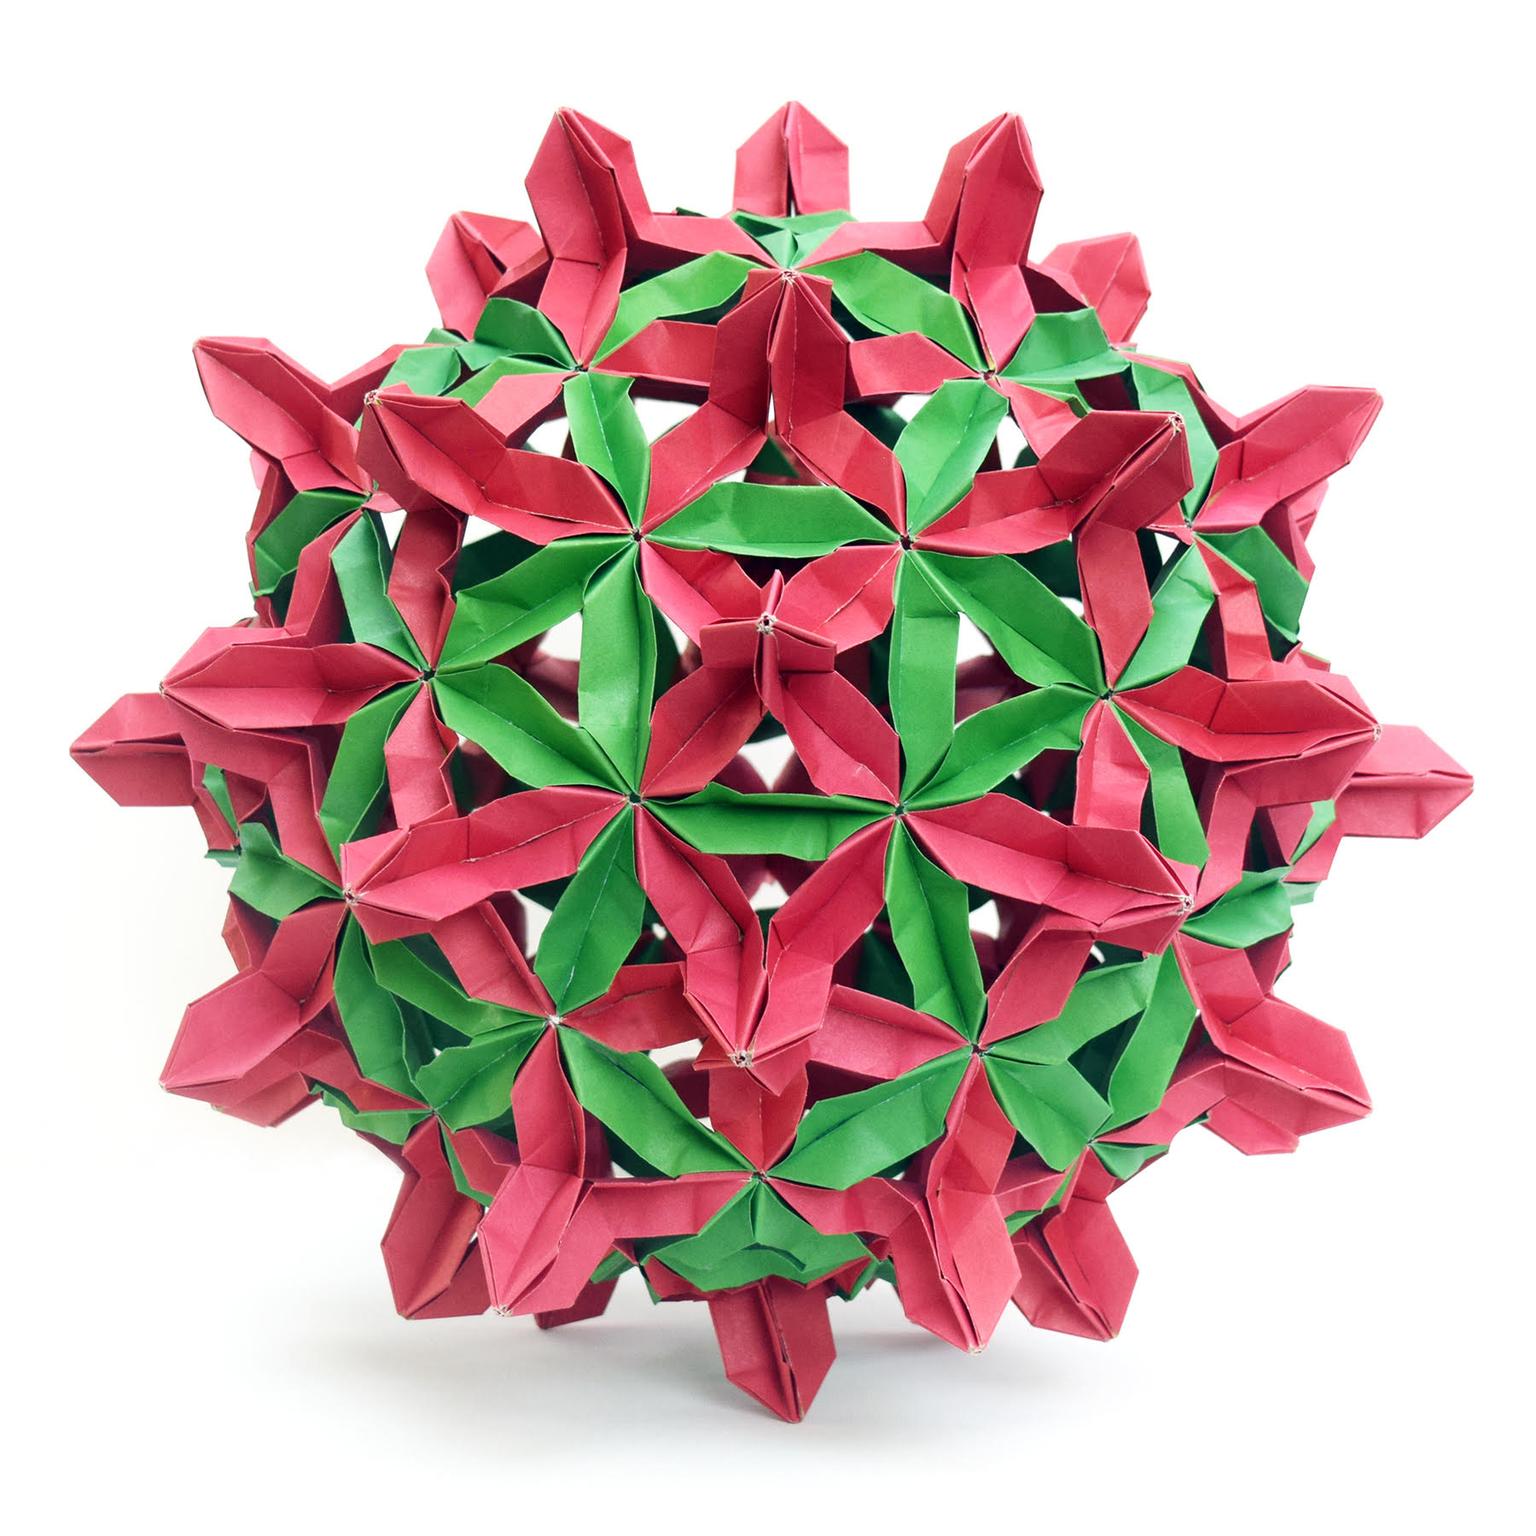 Image for entry 'Compound of a Rhombicosidodecahedron and an Icosidodecahedron'